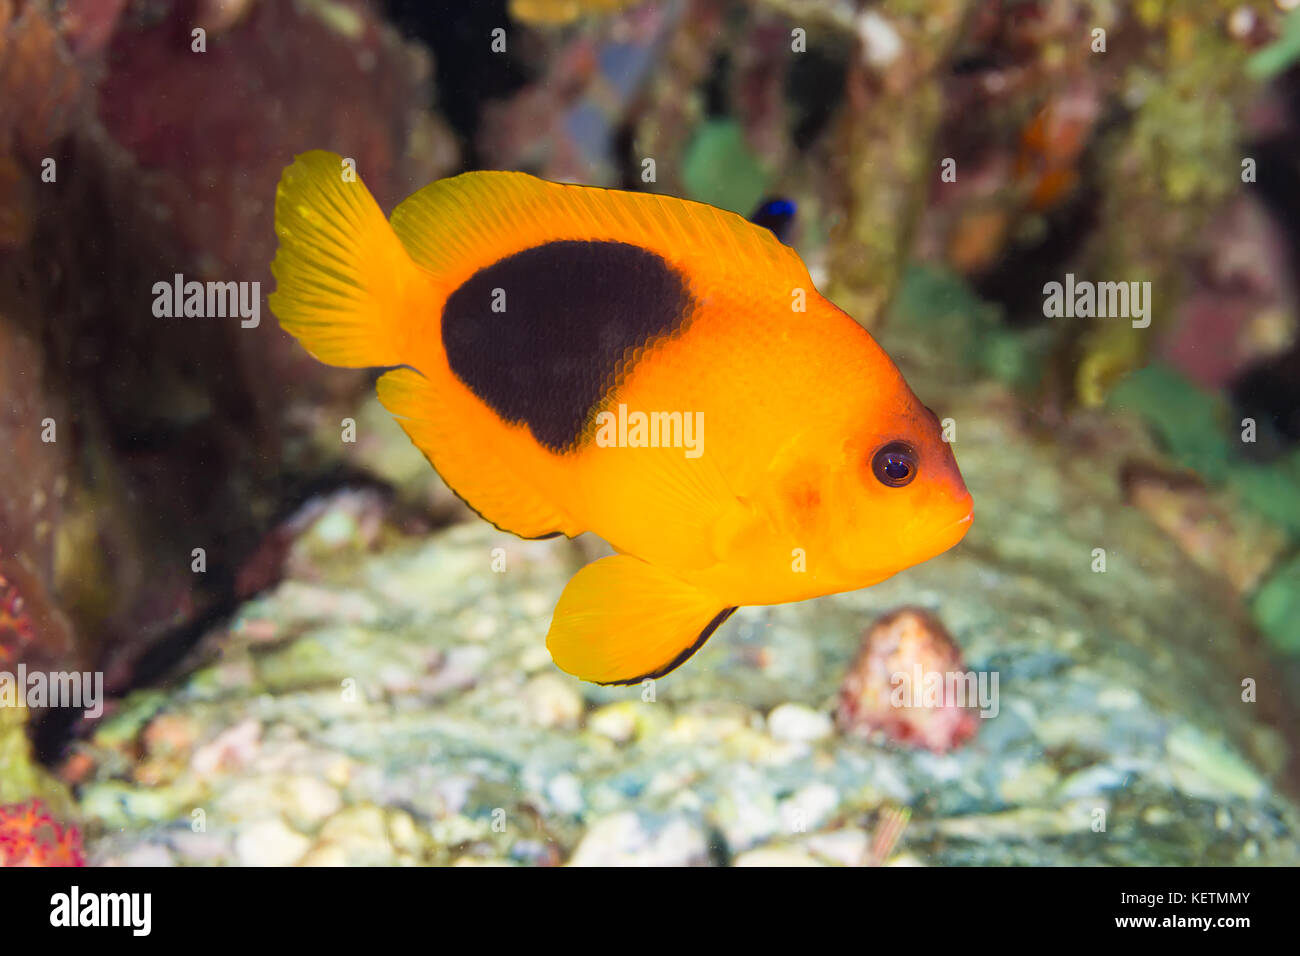 Red Saddleback Anemonefish (Amphiprion ephippium) in the coral reef Stock Photo